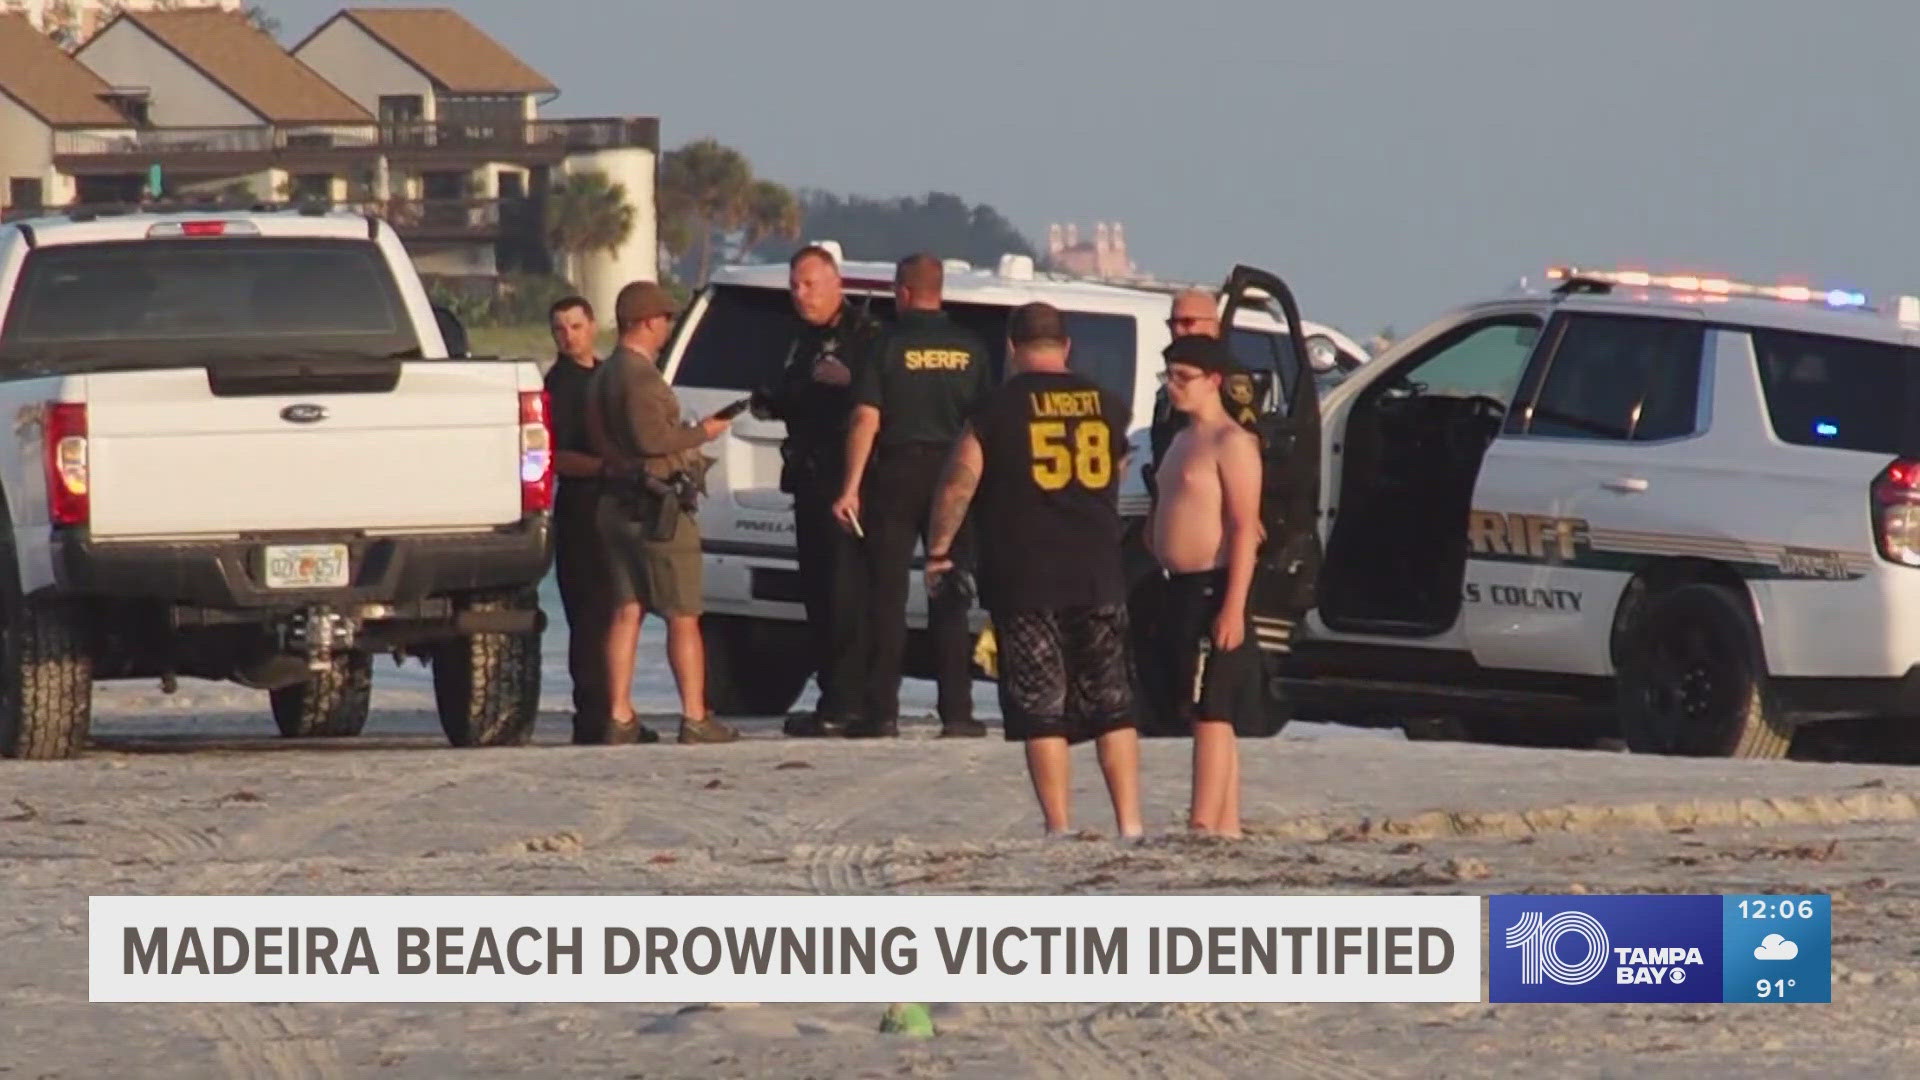 The 51-year-old man fell off a float and drowned on Tuesday afternoon.